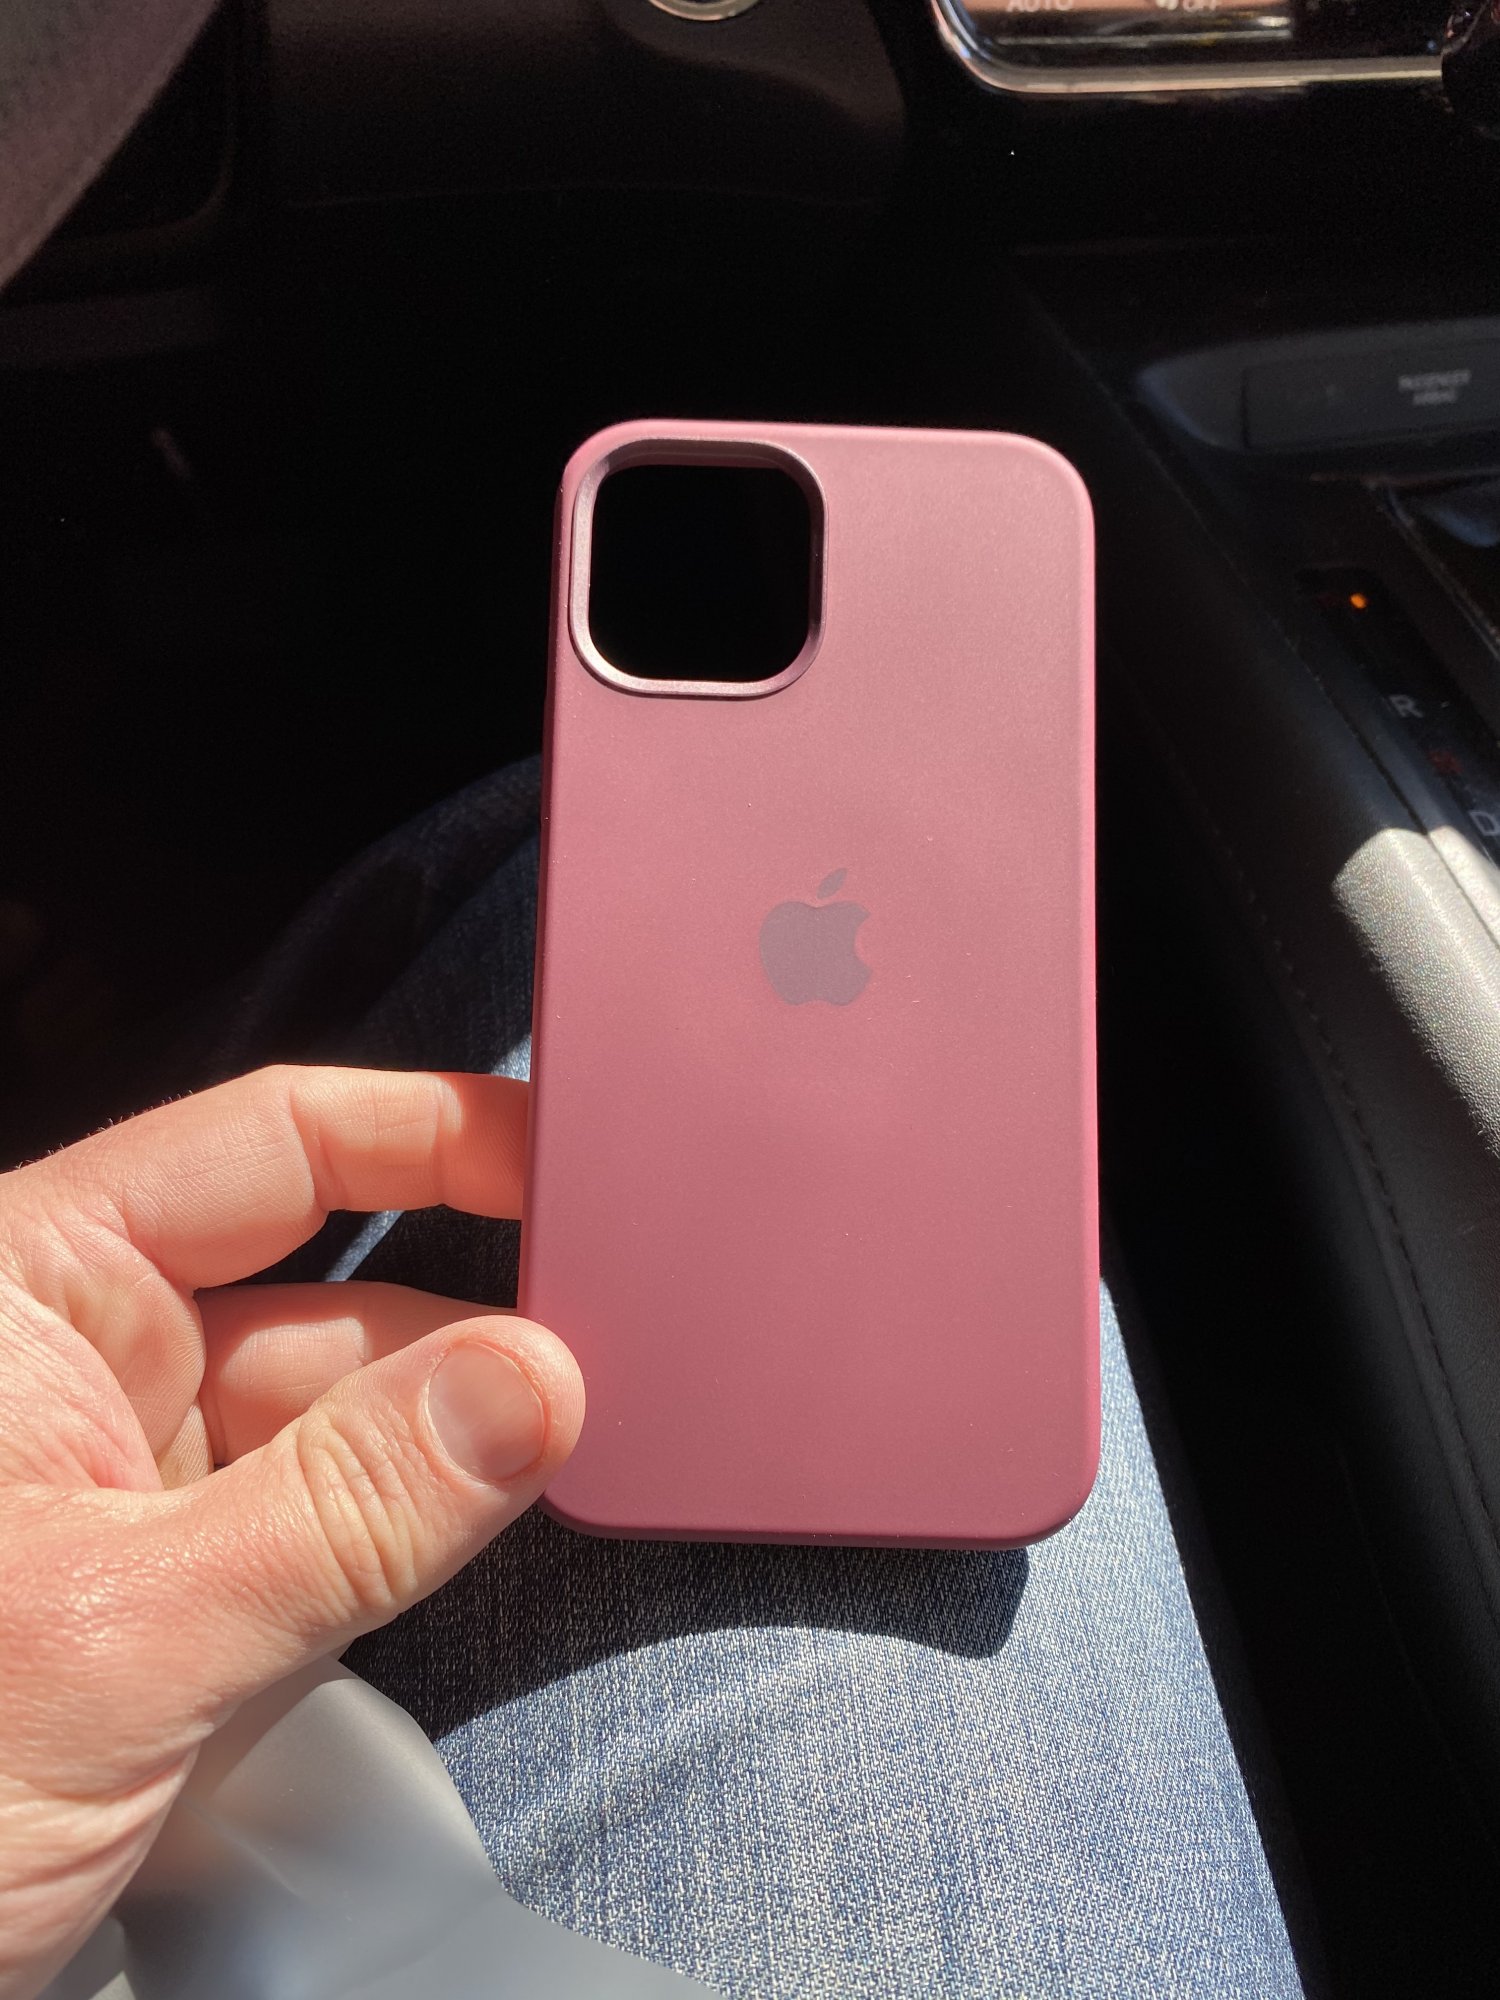 Which Case Did You Get For Your New Iphone 12 Mini Pro Max Merged Macrumors Forums